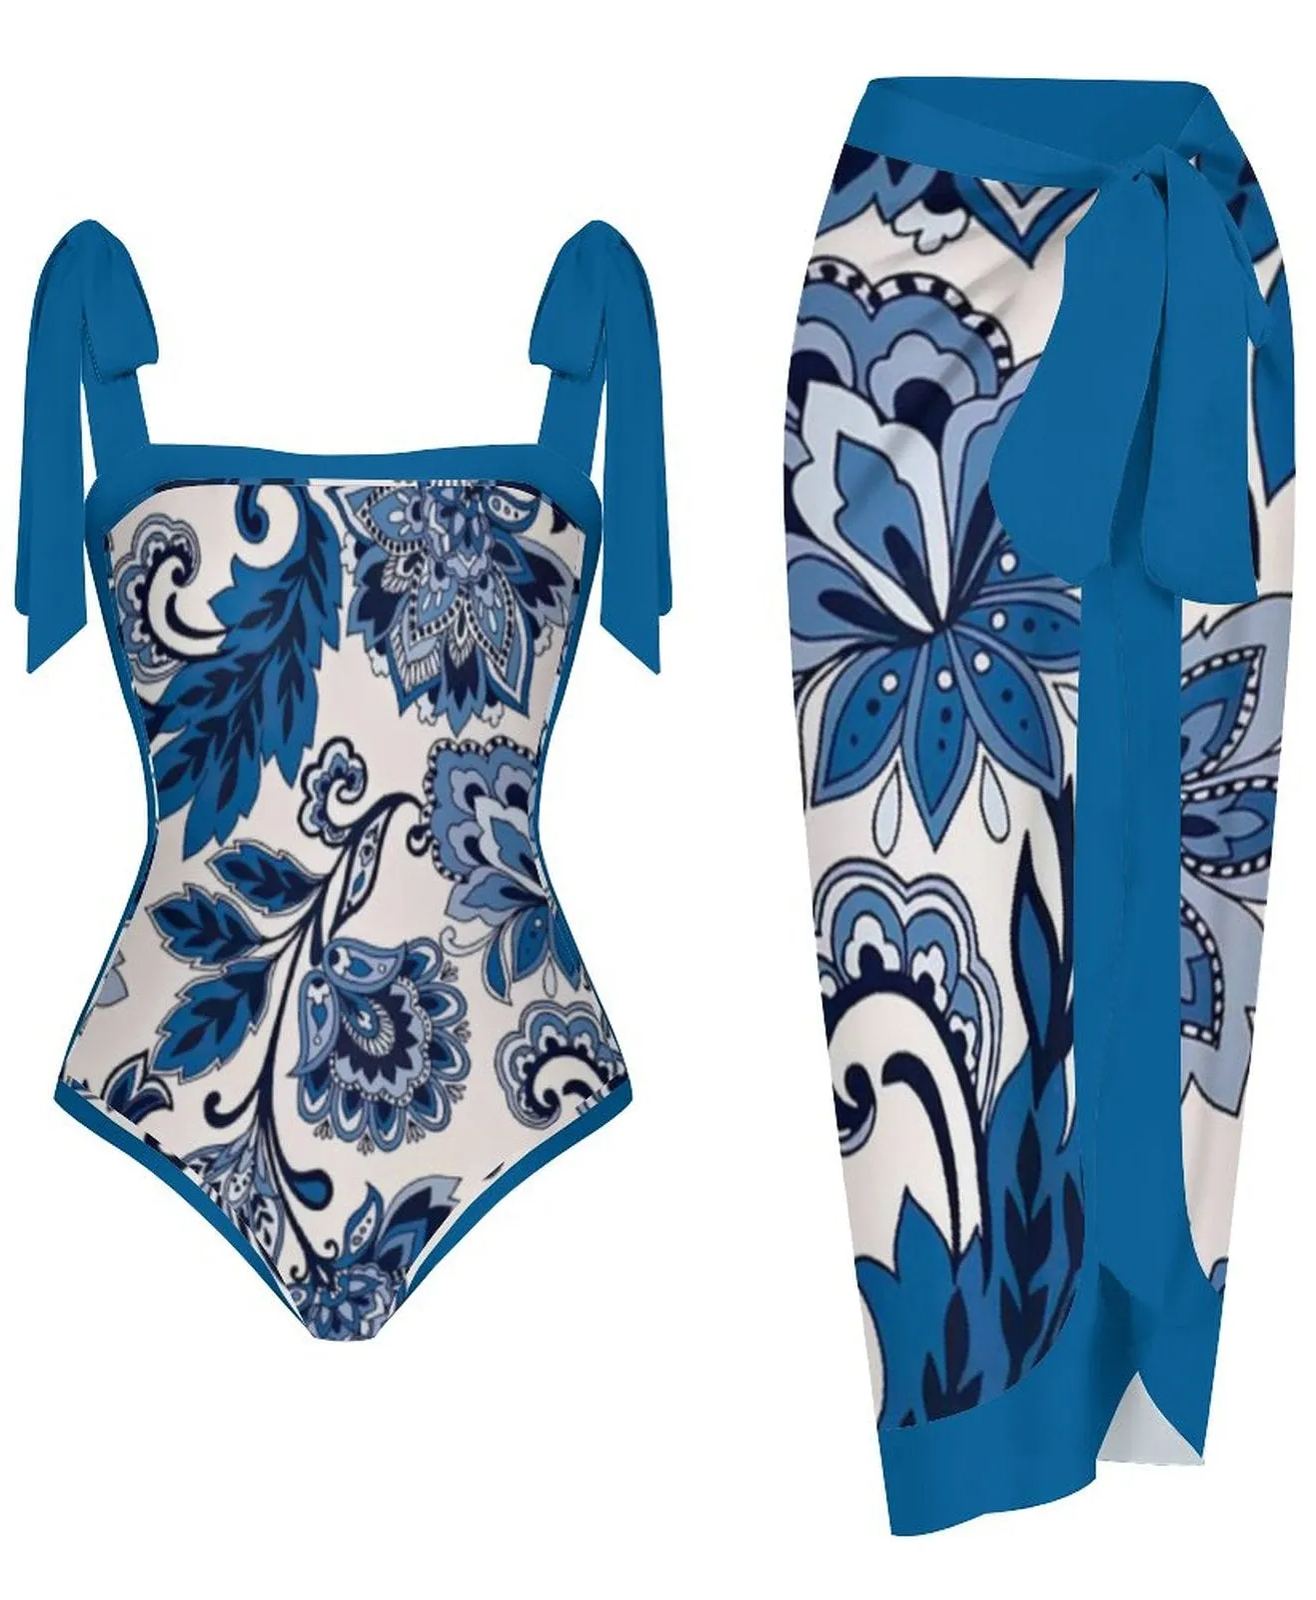 Fashion Printed One-Piece Swimsuit And Cover Up 2305104404